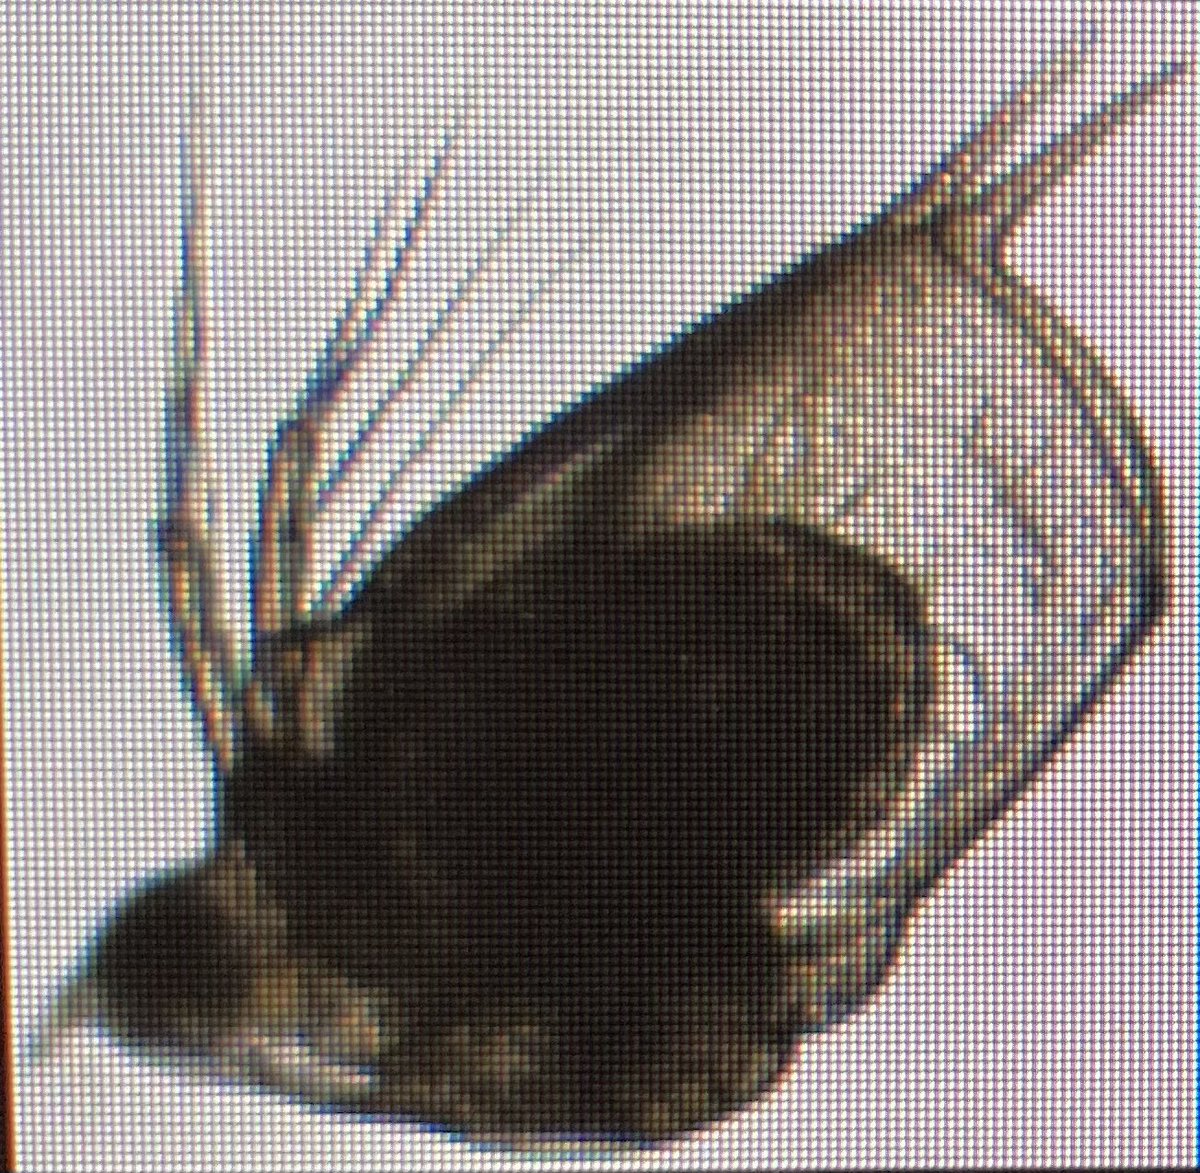 FlowCam day for @Jam_Orr! We found a #scapholeberis in our stressed #zooplankton samples🤩 ..a new one for our library!